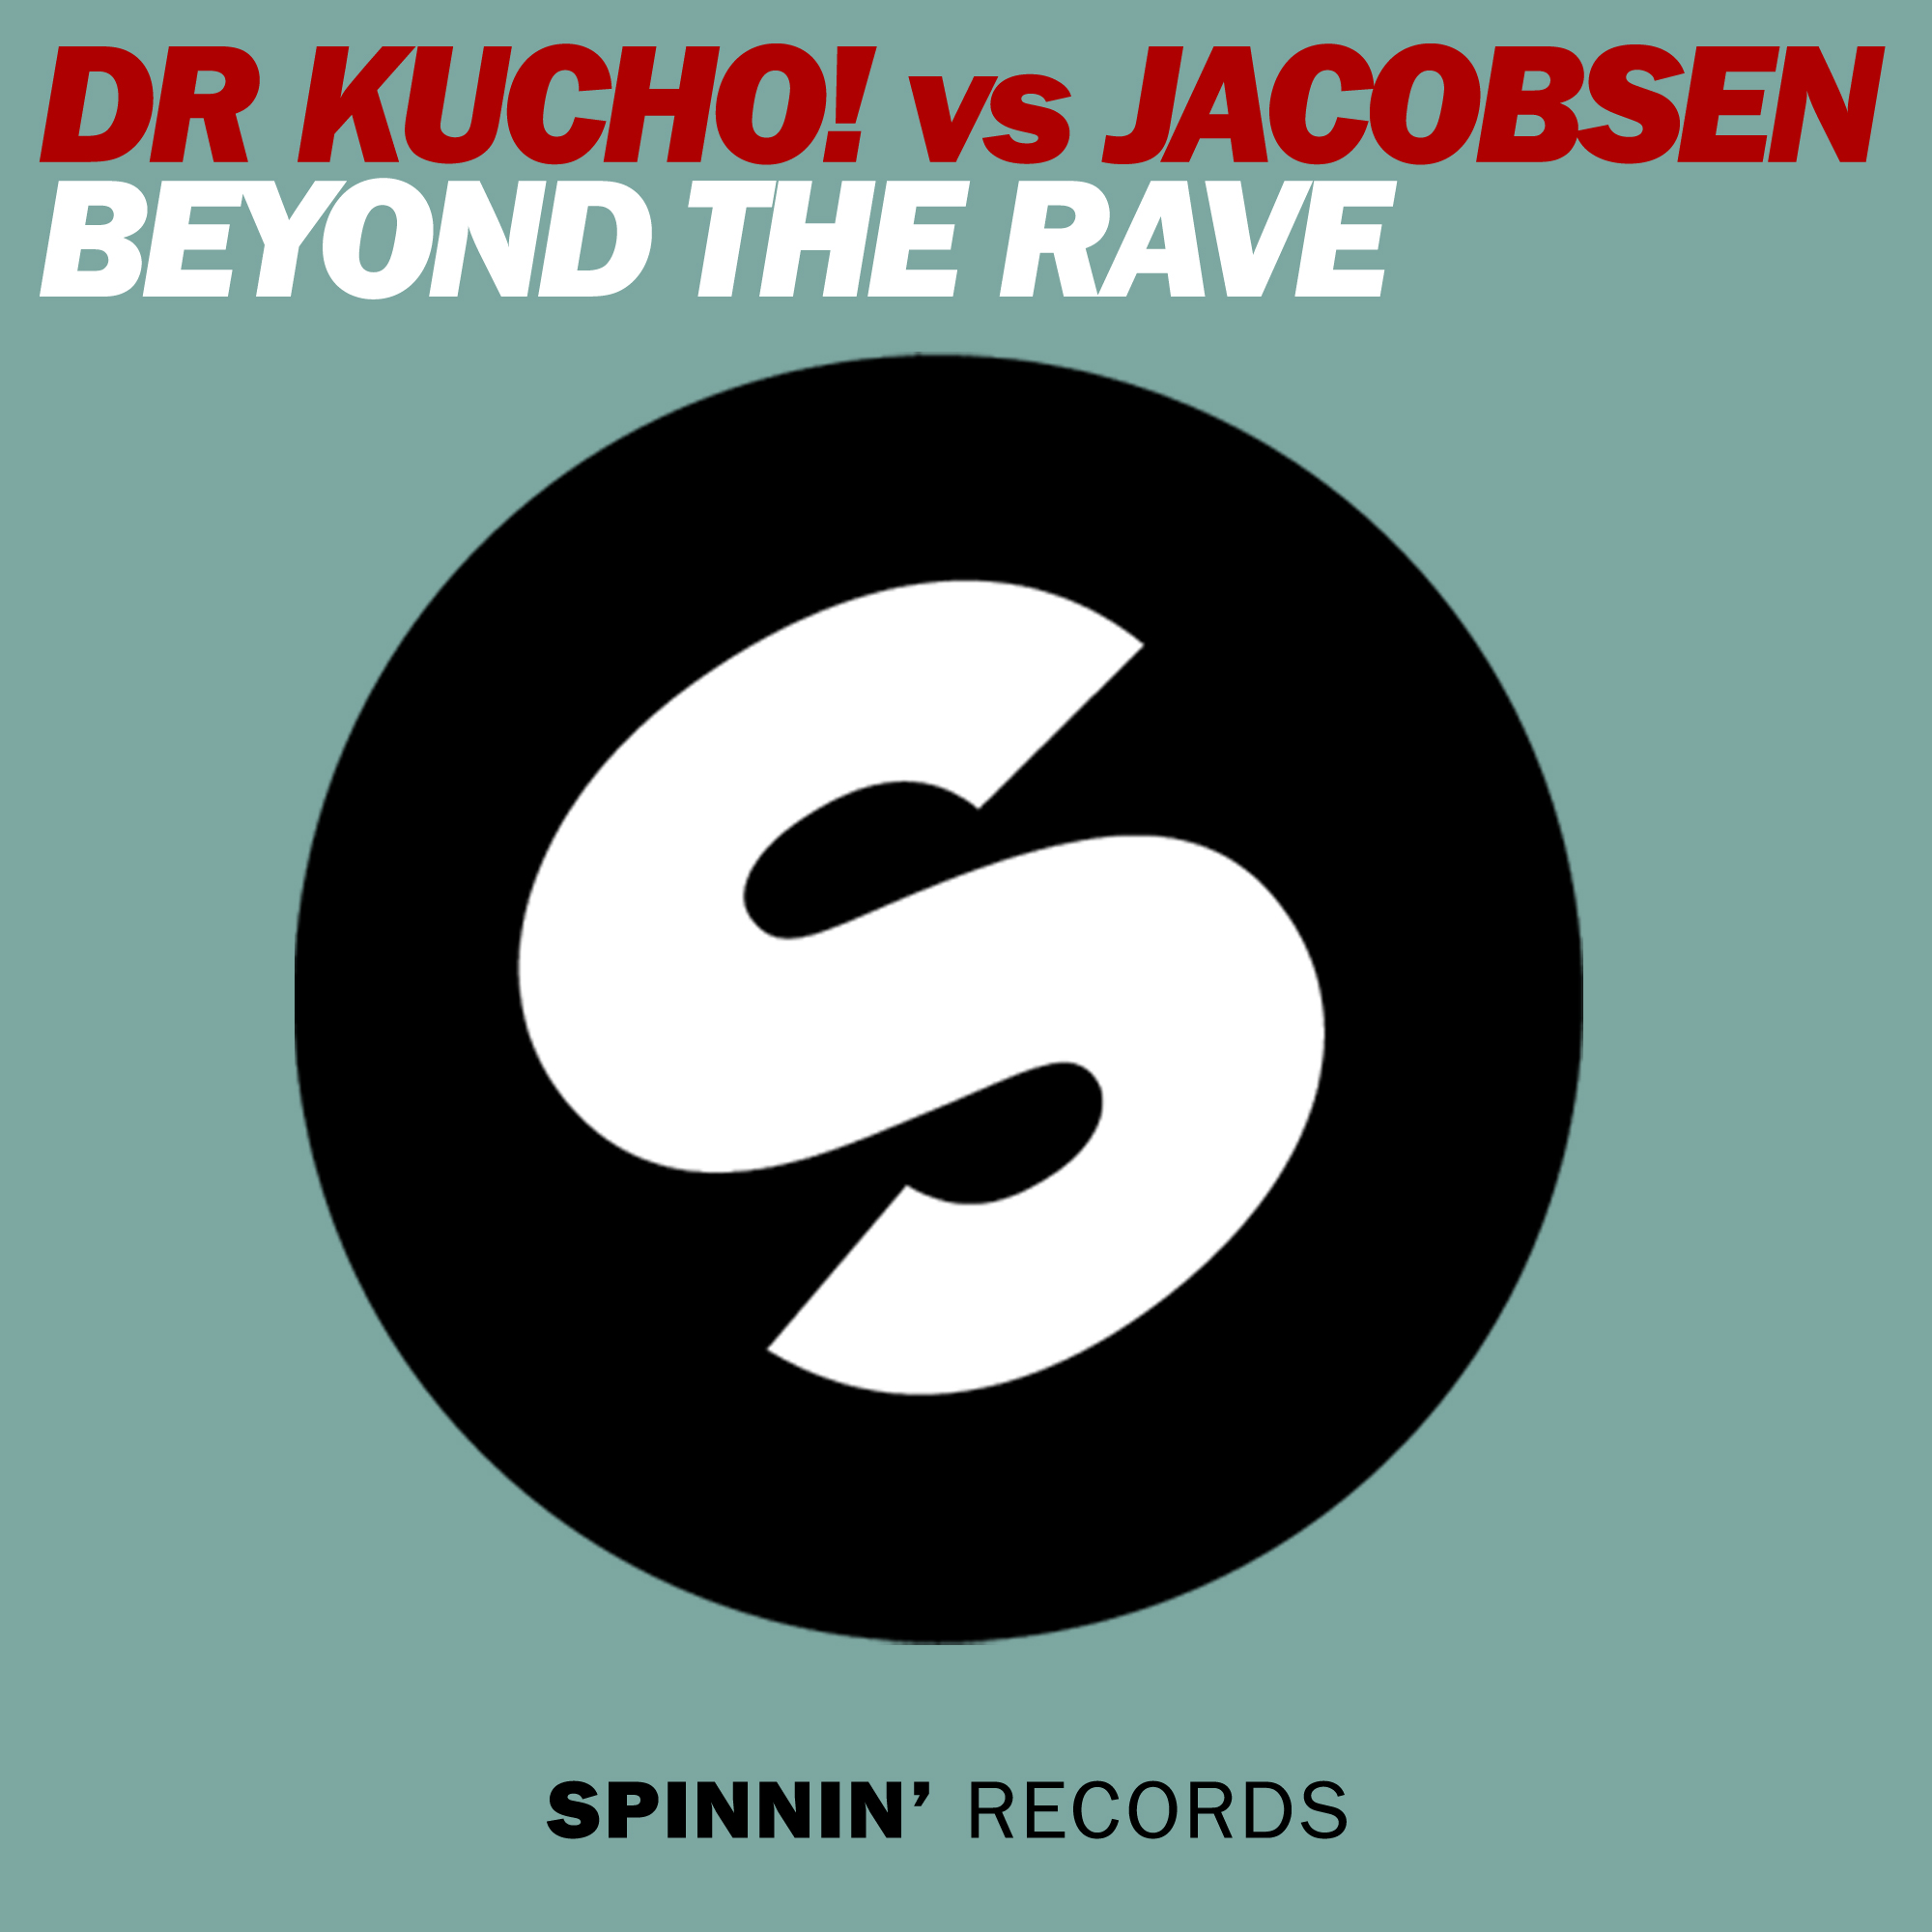 Dr Kucho - Beyond the rave EP